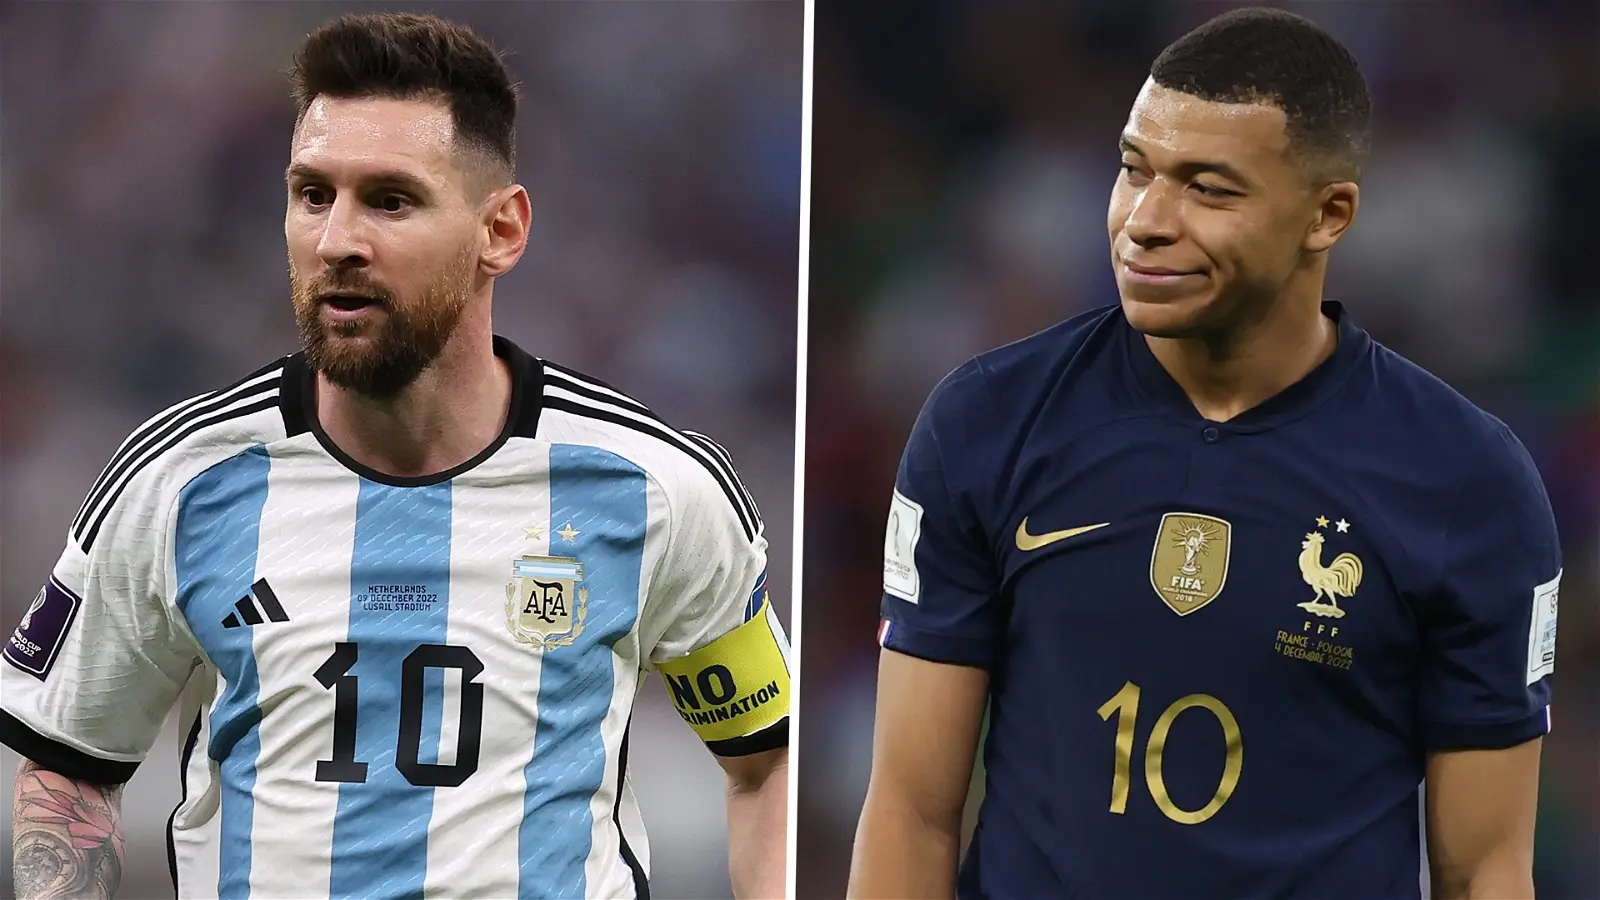 THE WORLD CUP FINAL IS MORE THAN JUST MESSI VS MBAPPE